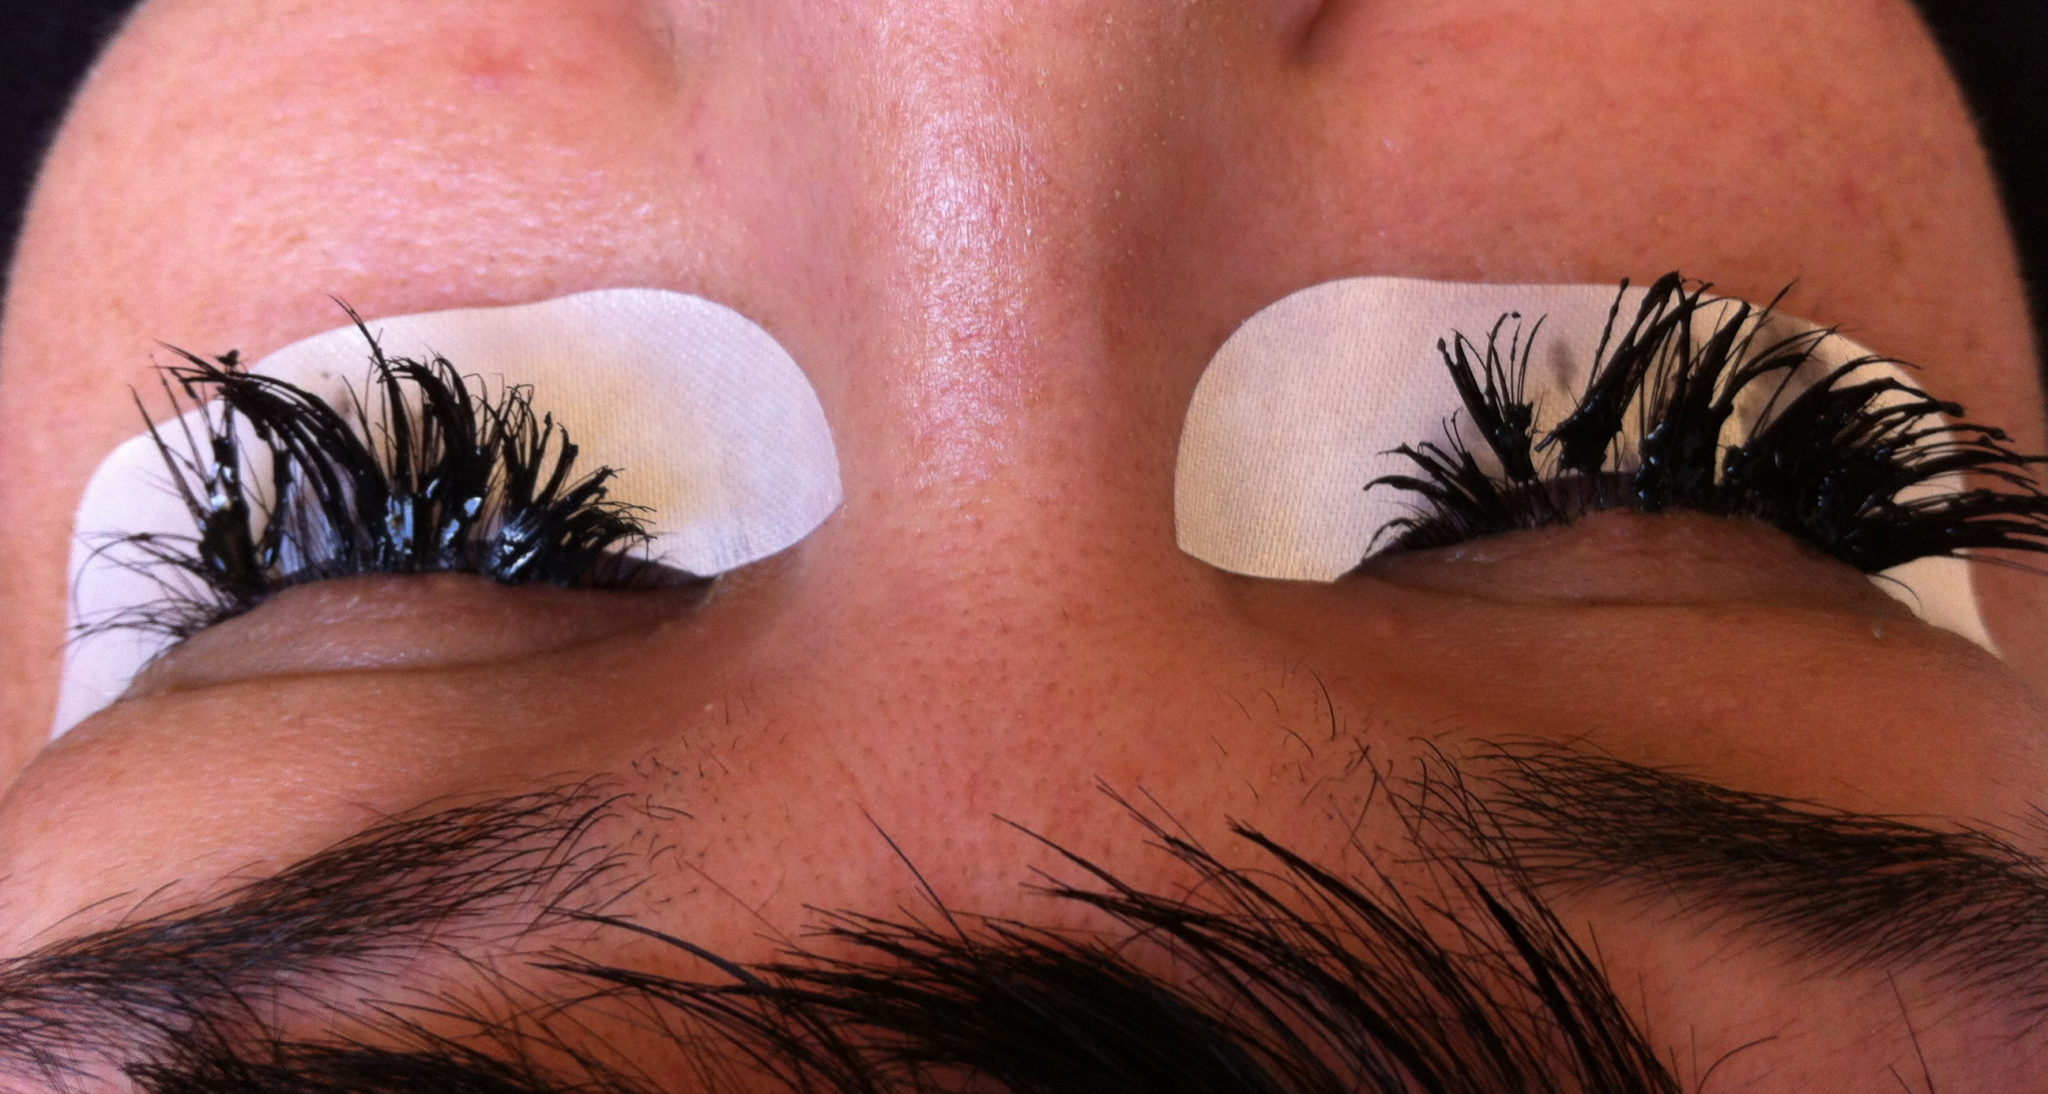 3. "How to Care for Your Nail Art and Eyelash Extensions to Make Them Last" - wide 4